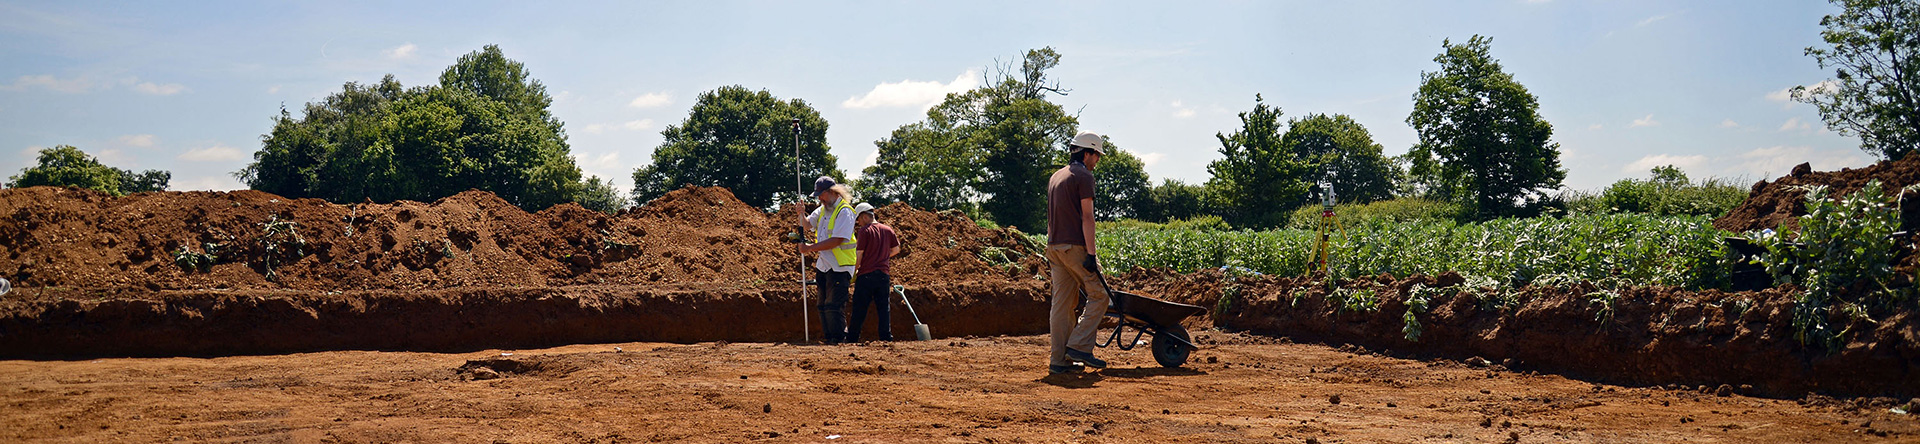 Photo of wide view of excavation trench with spoilheap at rear. In the trench is a man with a wheelbarrow and two surveying